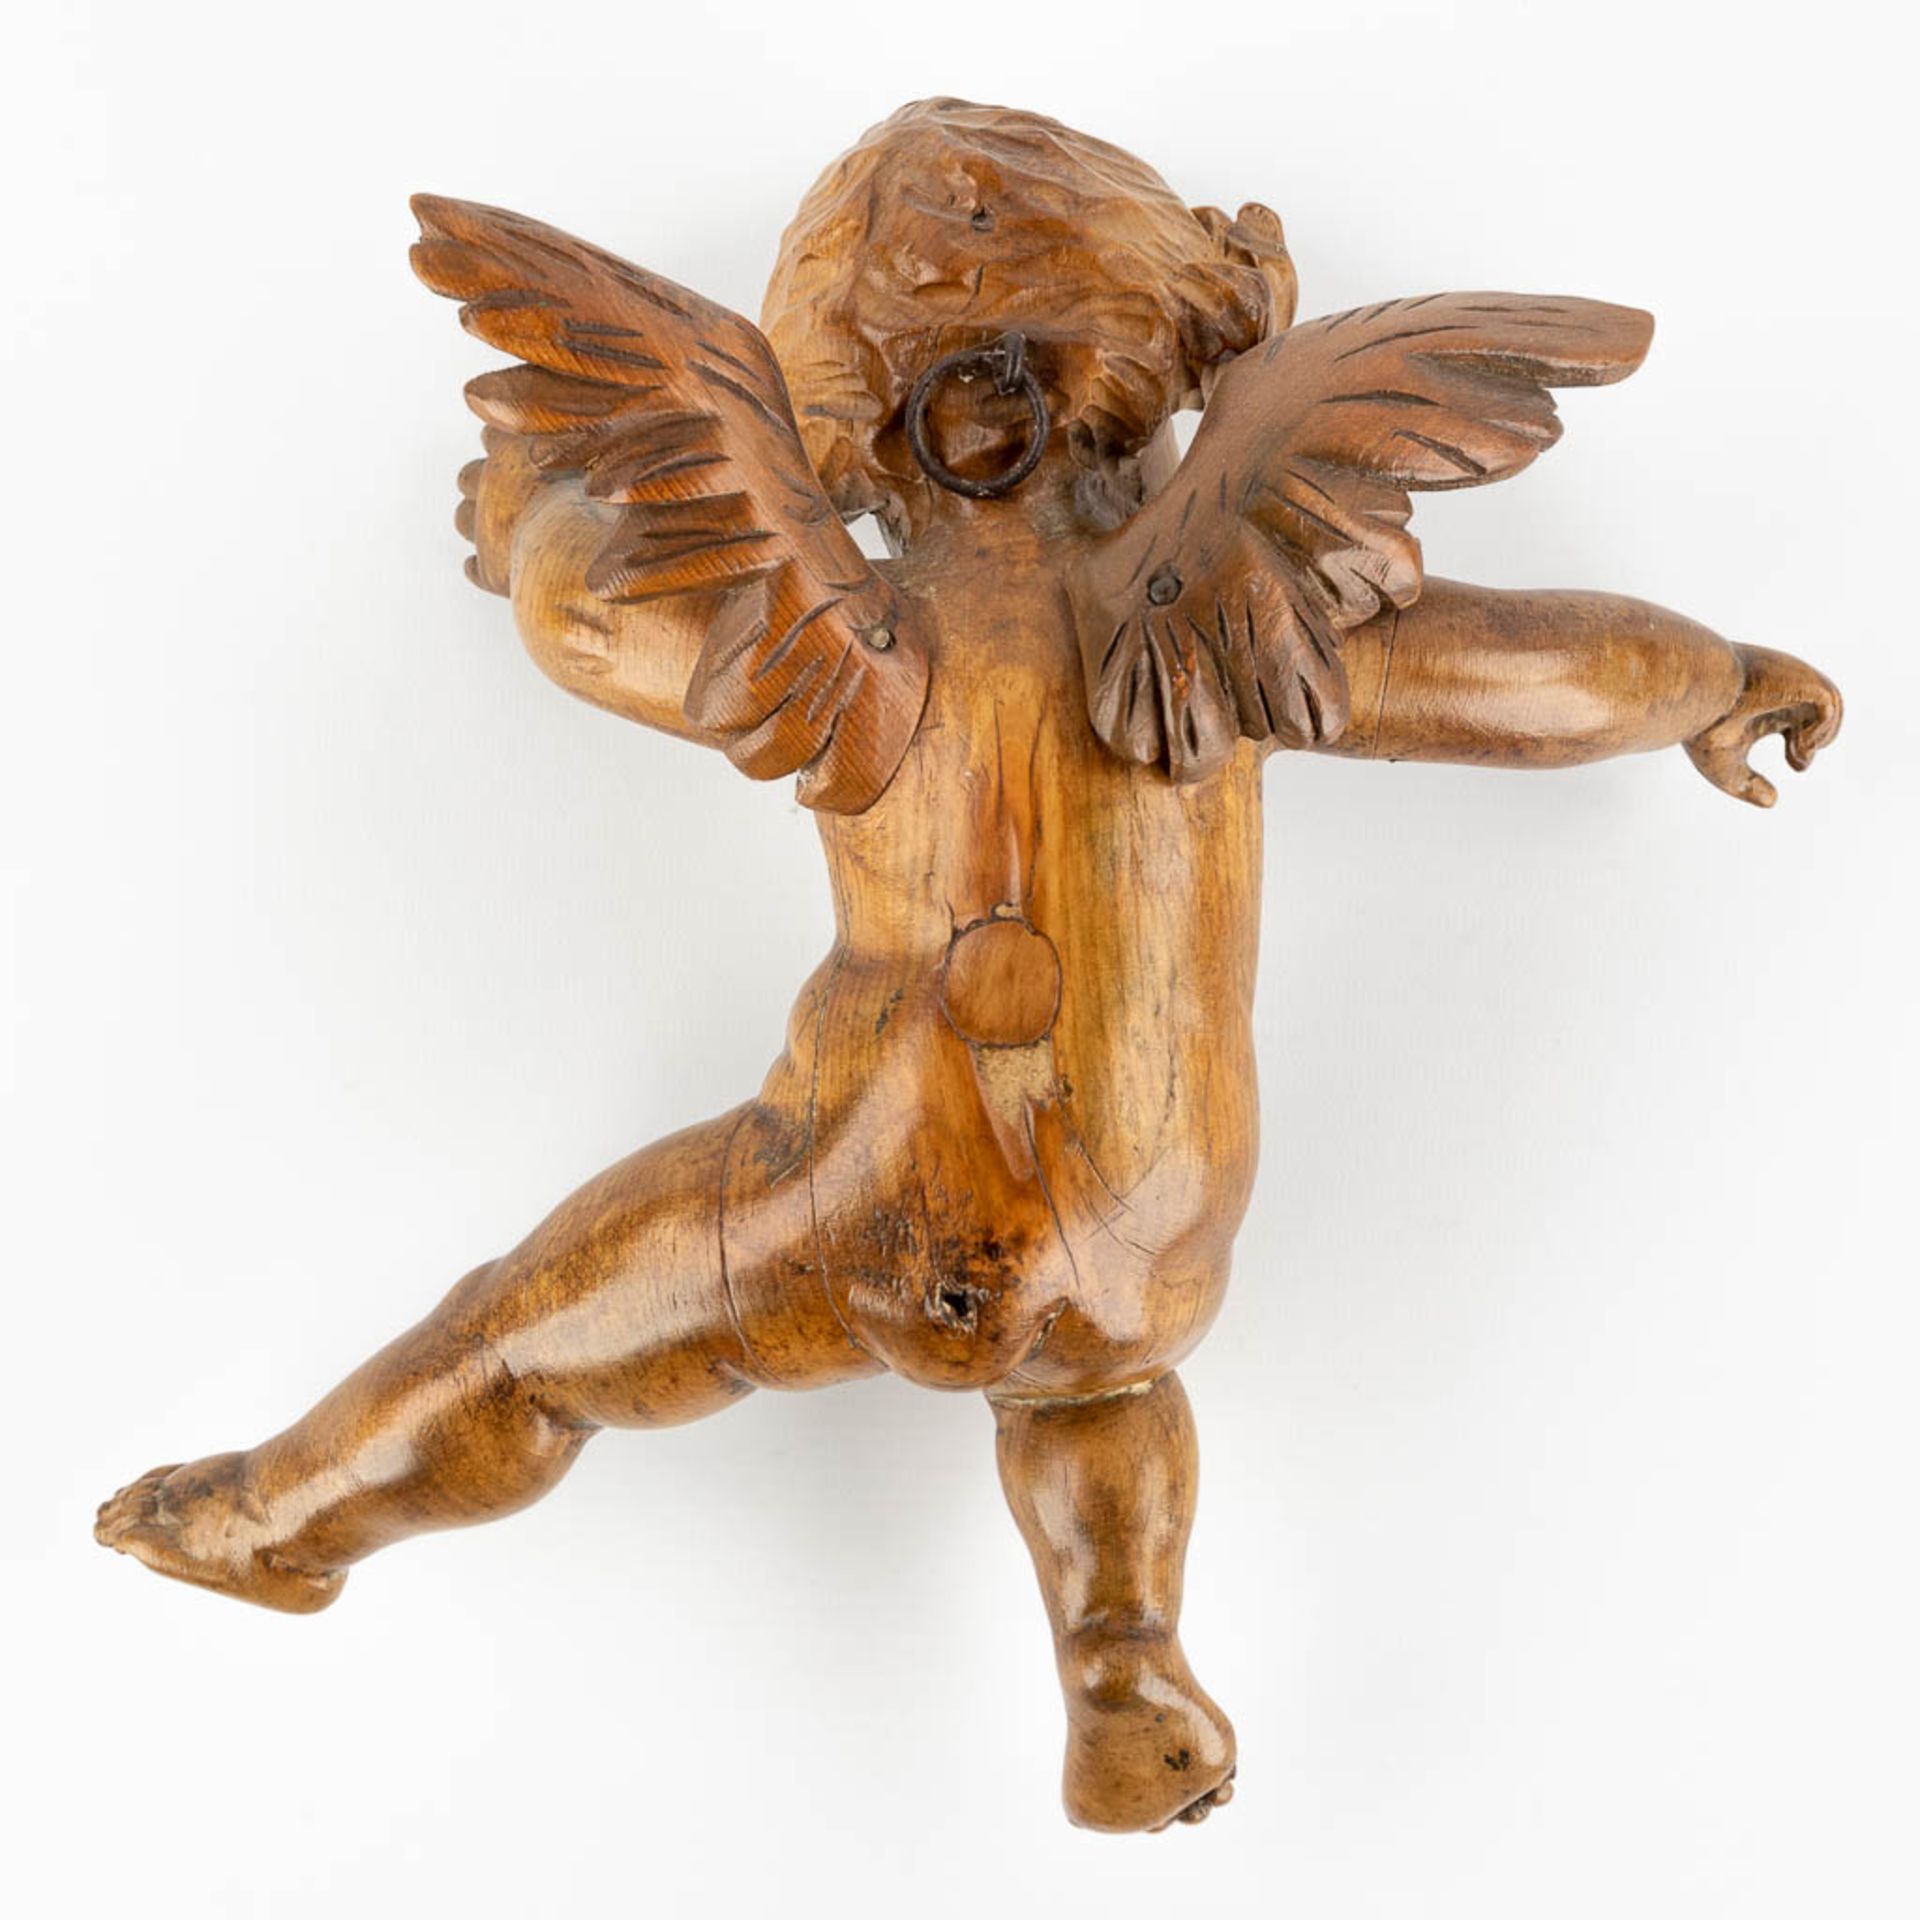 A pair of wood-sculptured putti, basswood, 18th C. (W:22 x H:30 cm) - Image 14 of 14